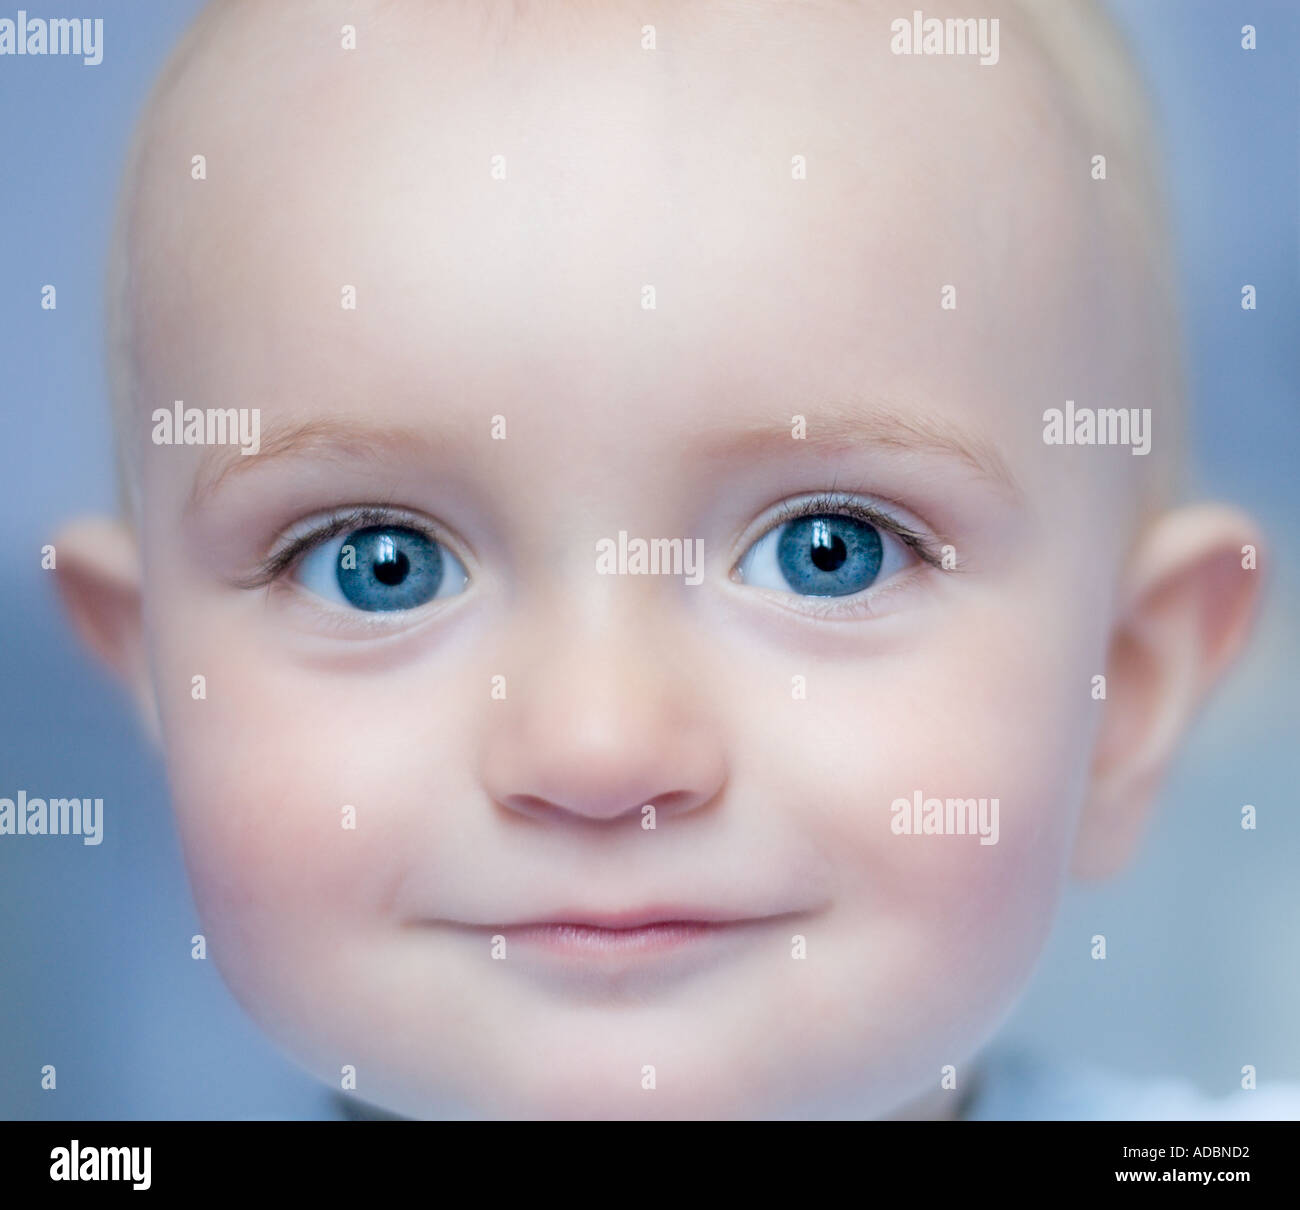 10 month old baby boy with bright blue eyes Stock Photo - Alamy